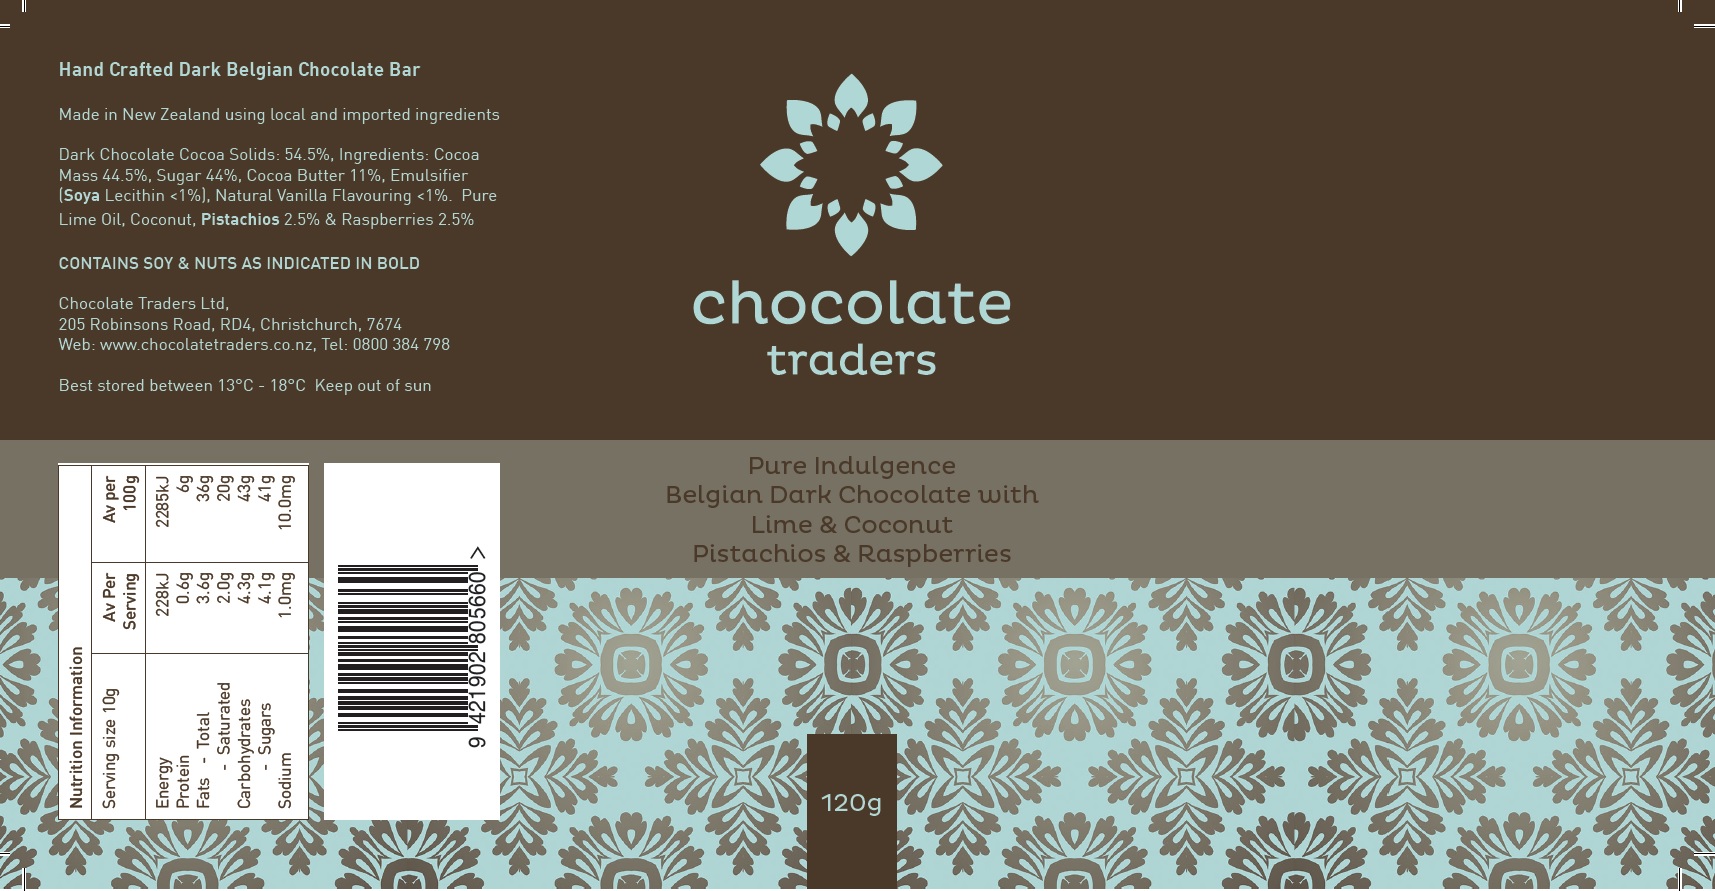 Pure Indulgence Dark Chocolate with Lime and Coconut, Pistachio and Raspberry (120g)